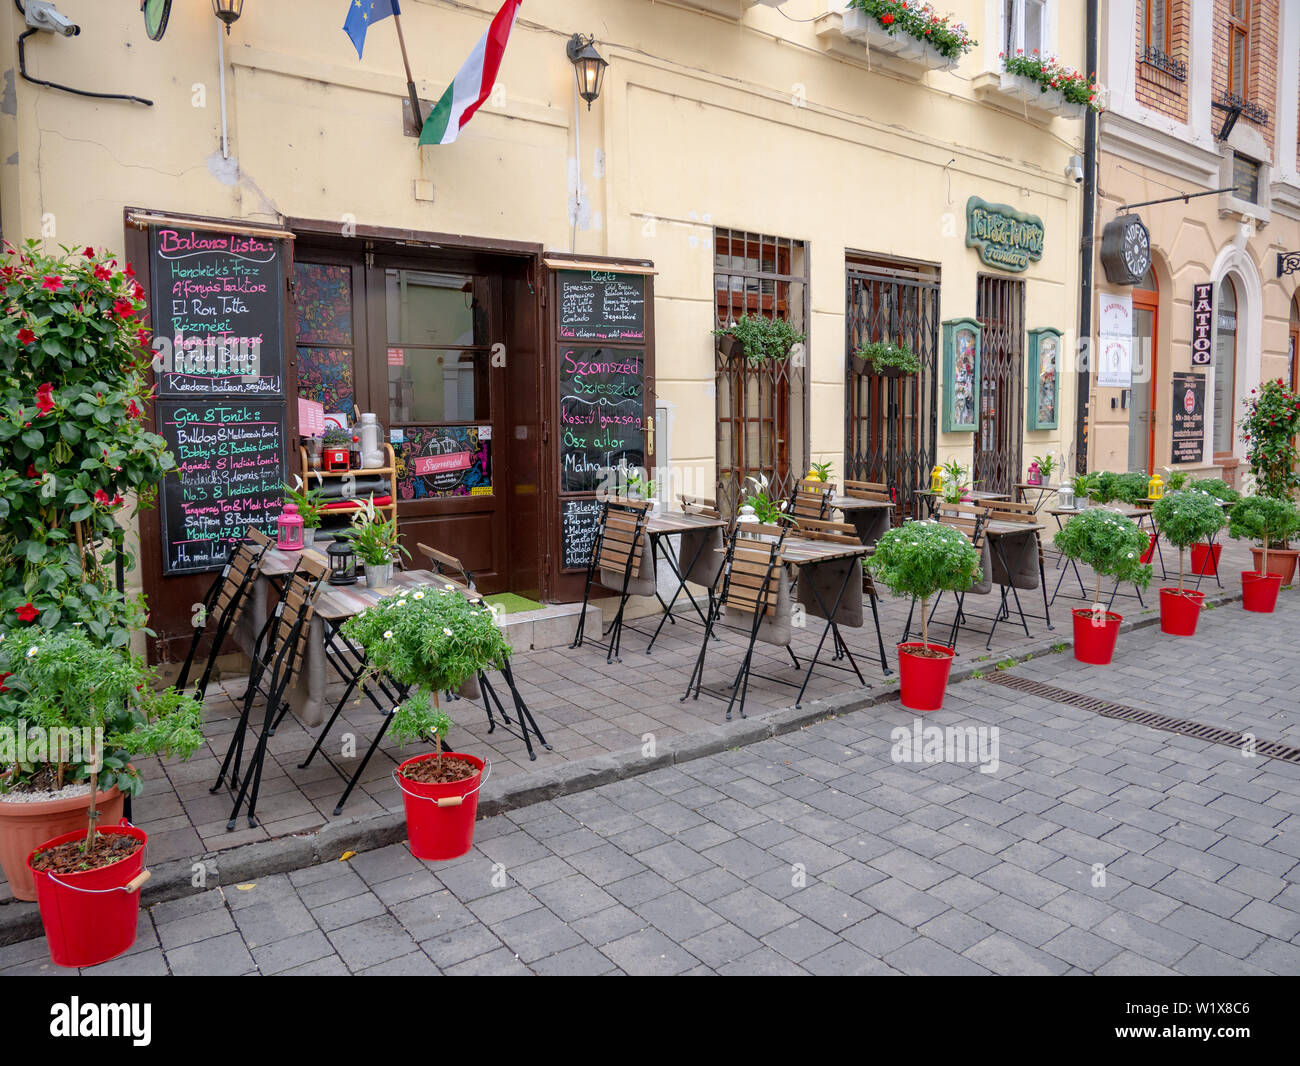 Gyor Hungary 05 07 2019 a cozy little pub terrace with flowers Stock Photo  - Alamy